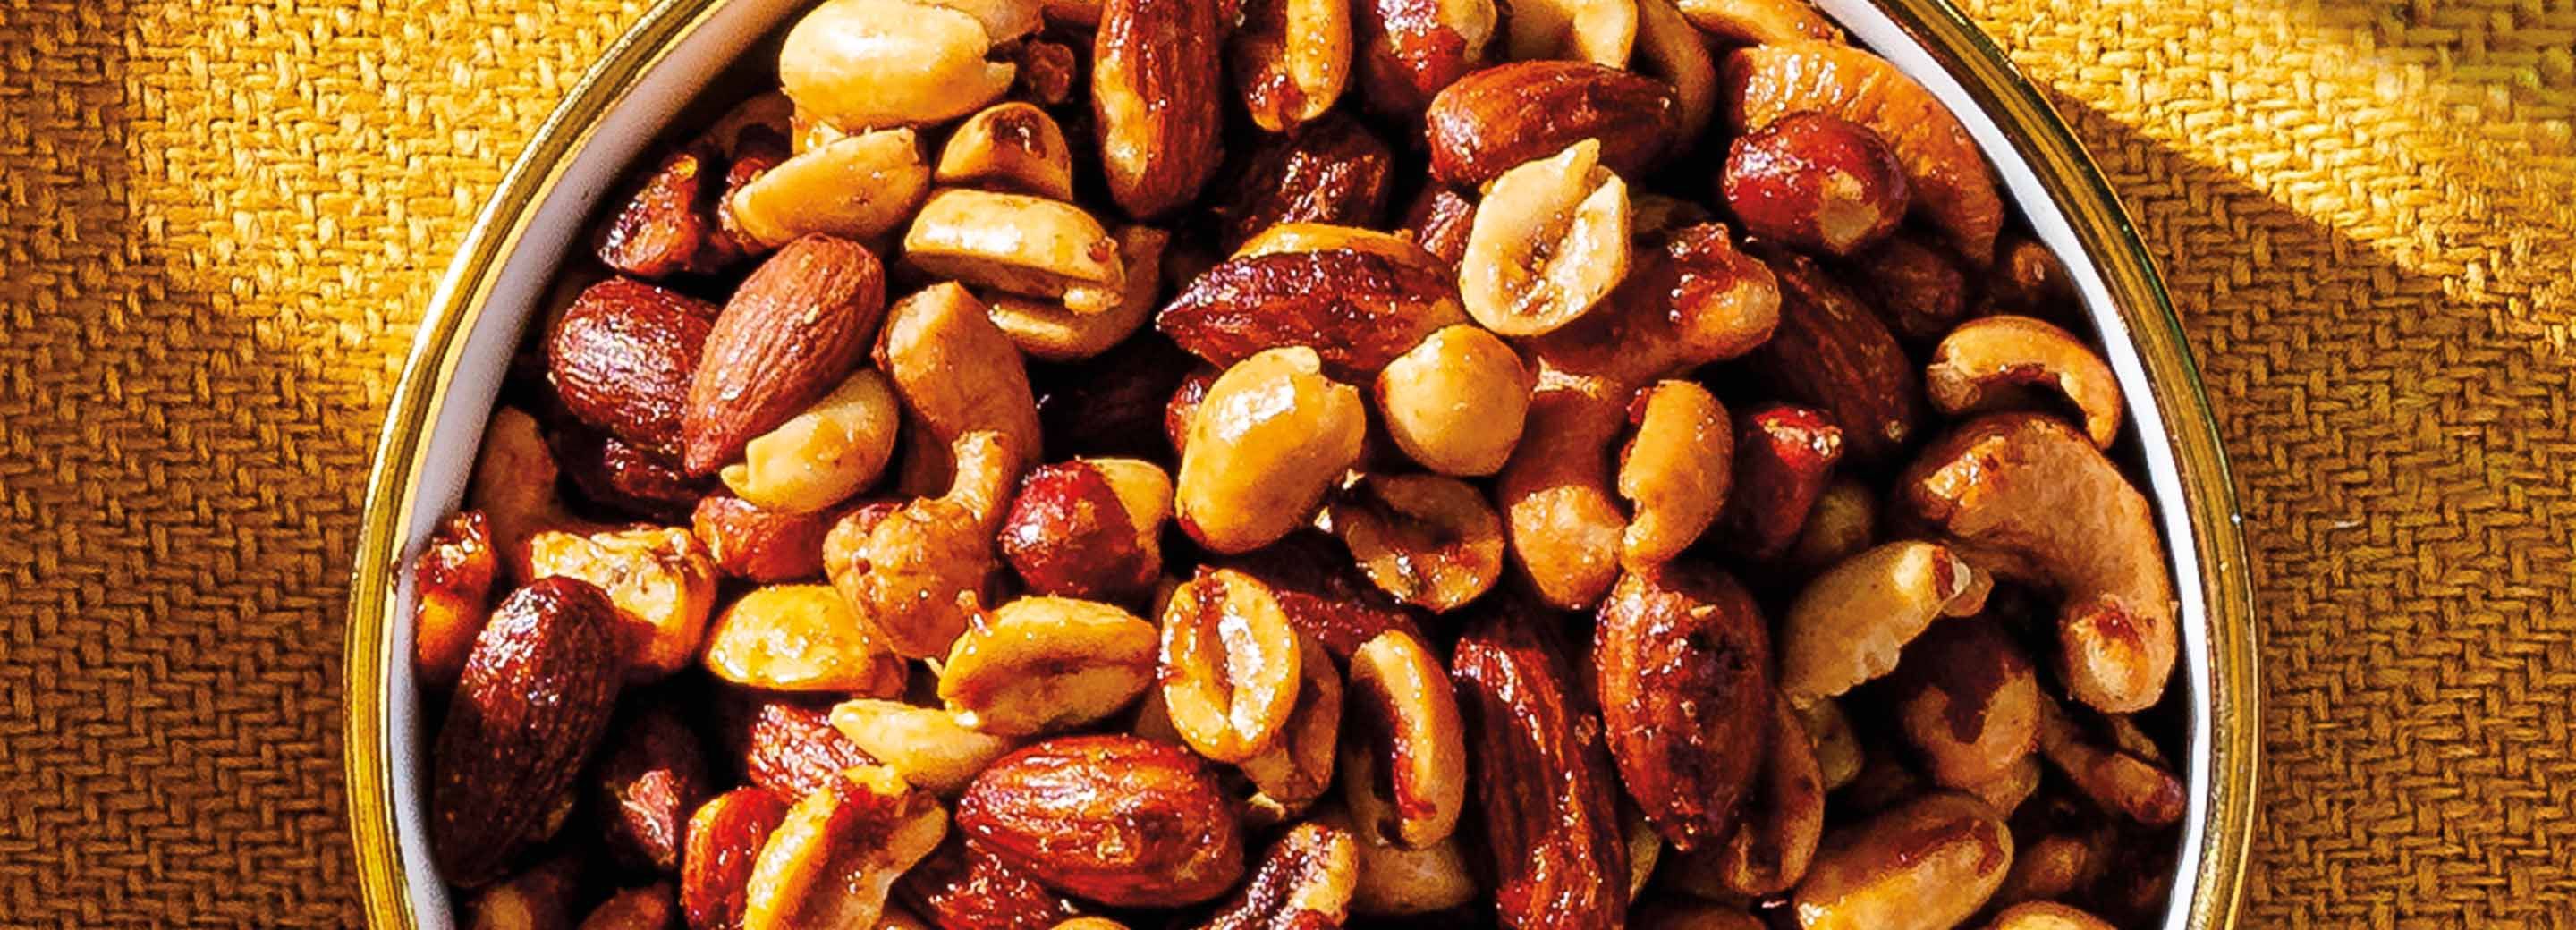 Herby Mixed Nuts